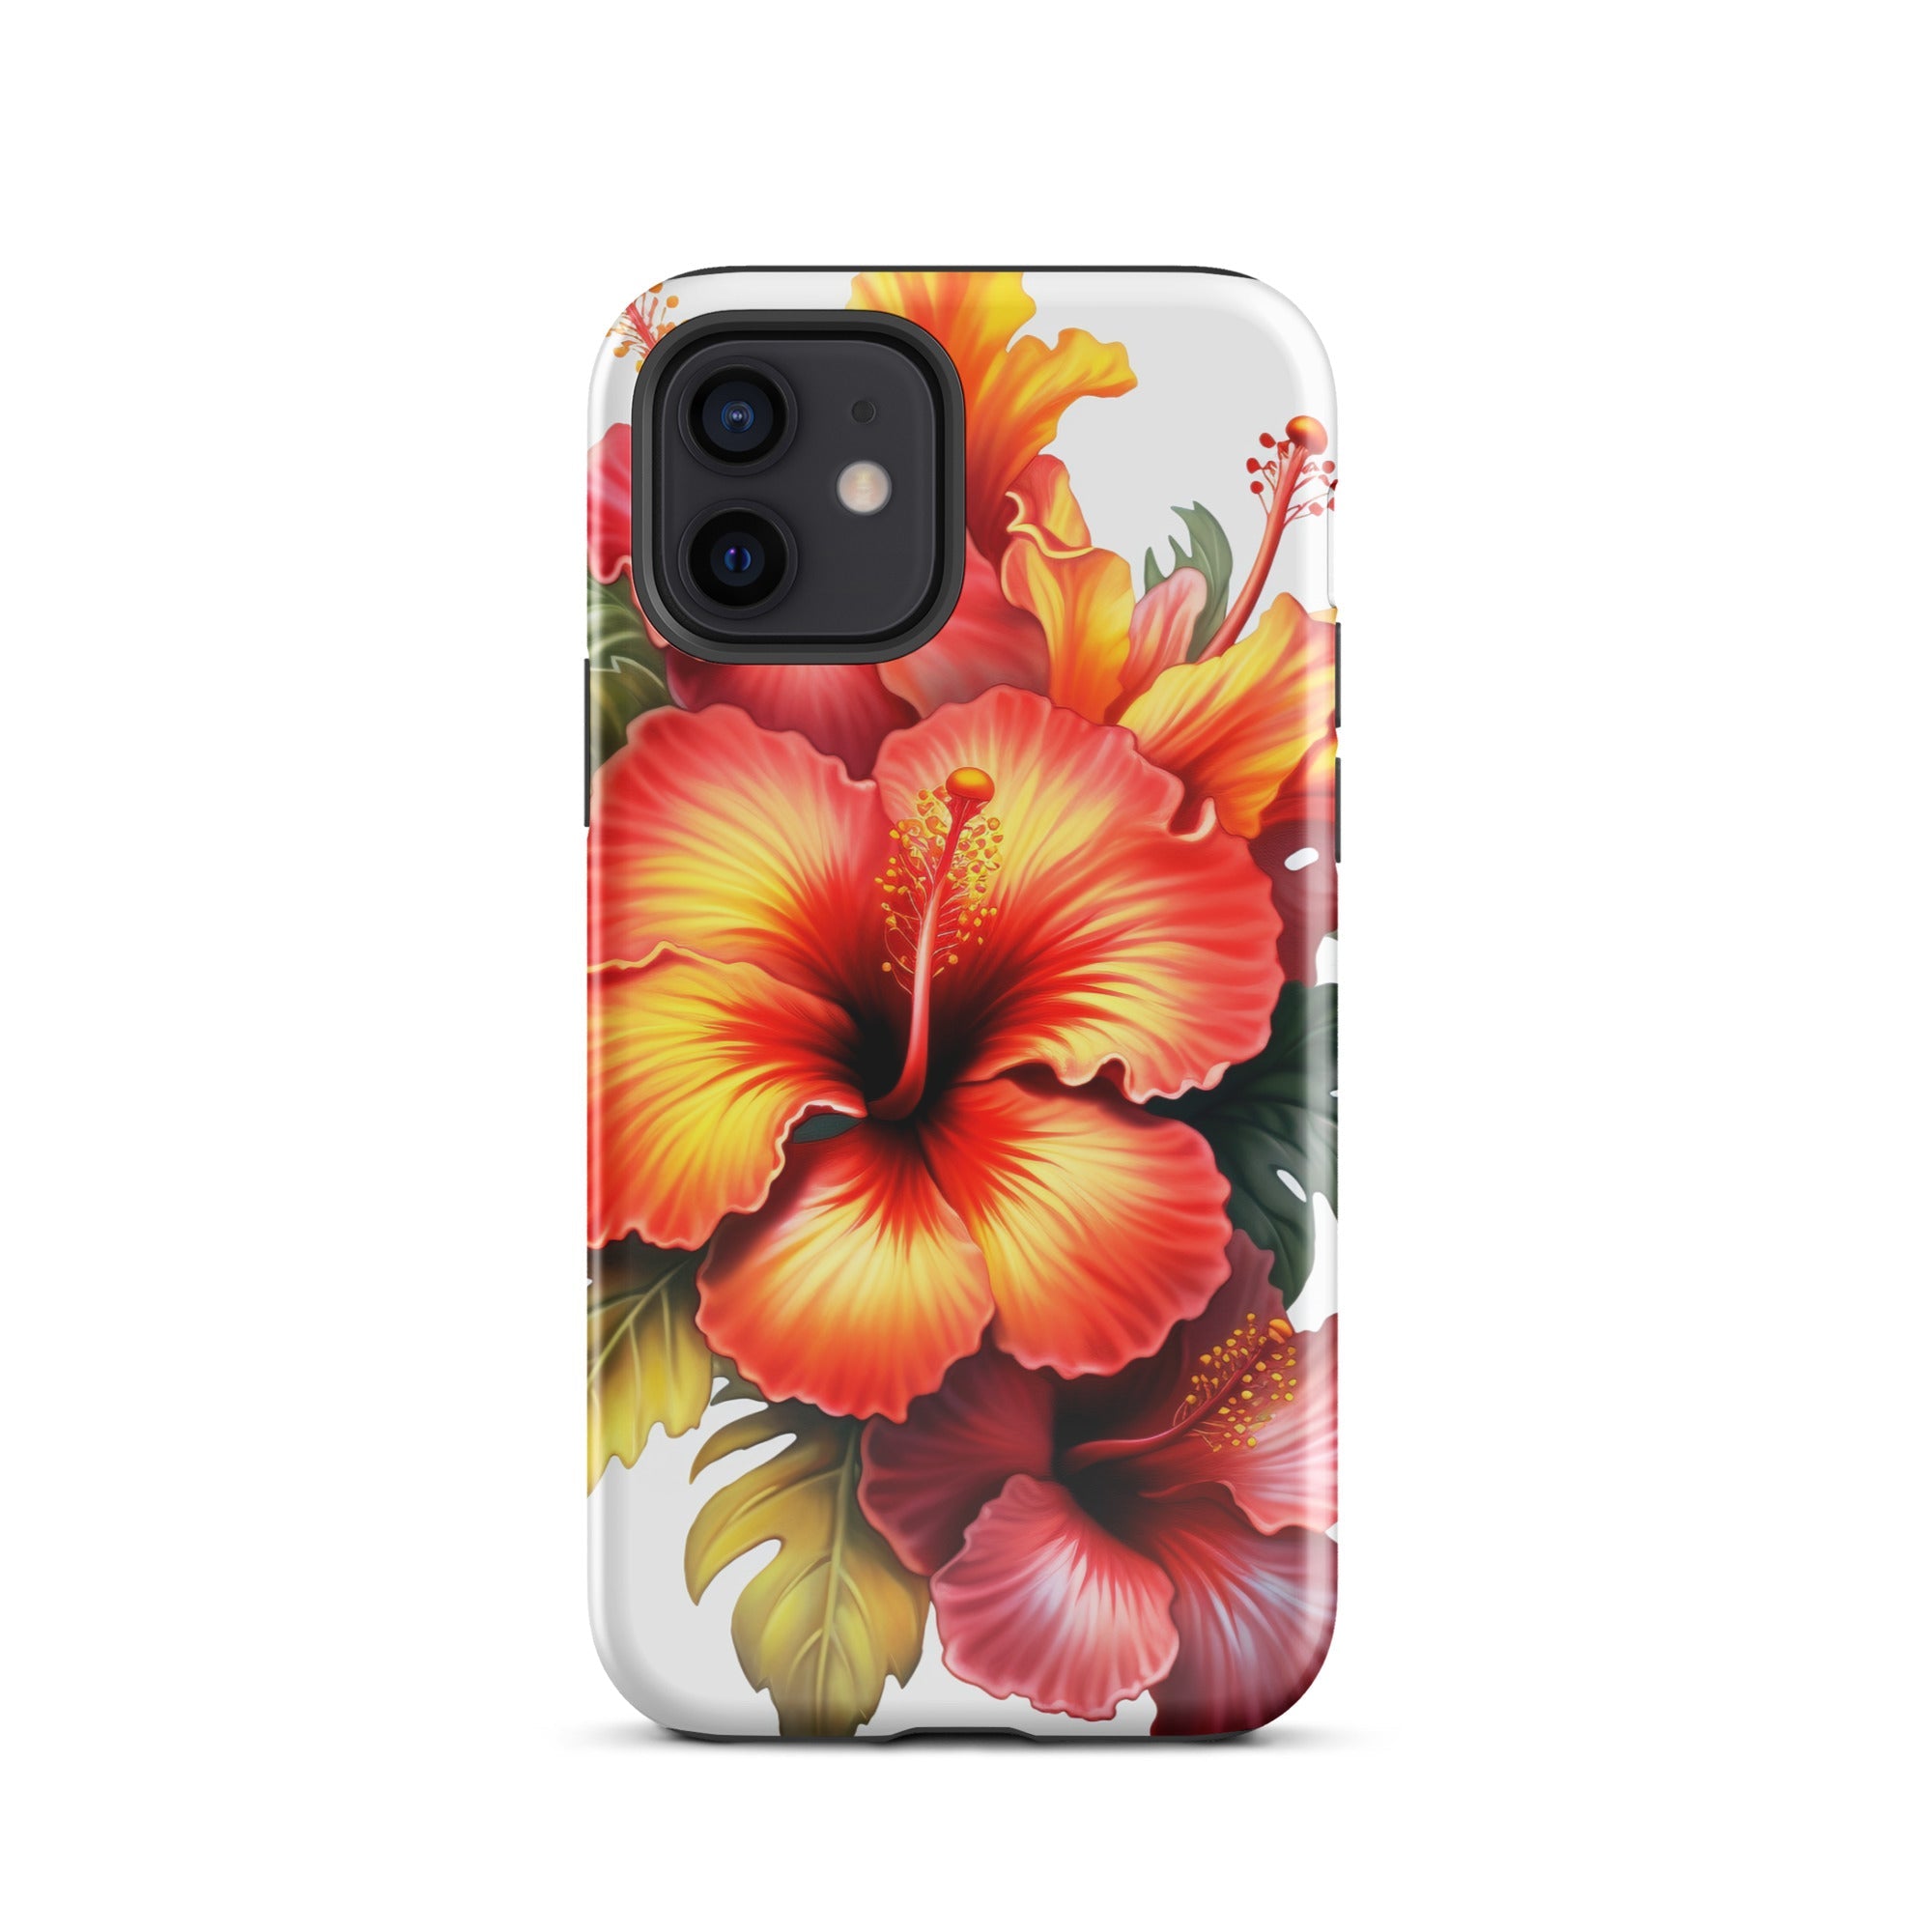 Hibiscus Flower iPhone Case by Visual Verse - Image 9